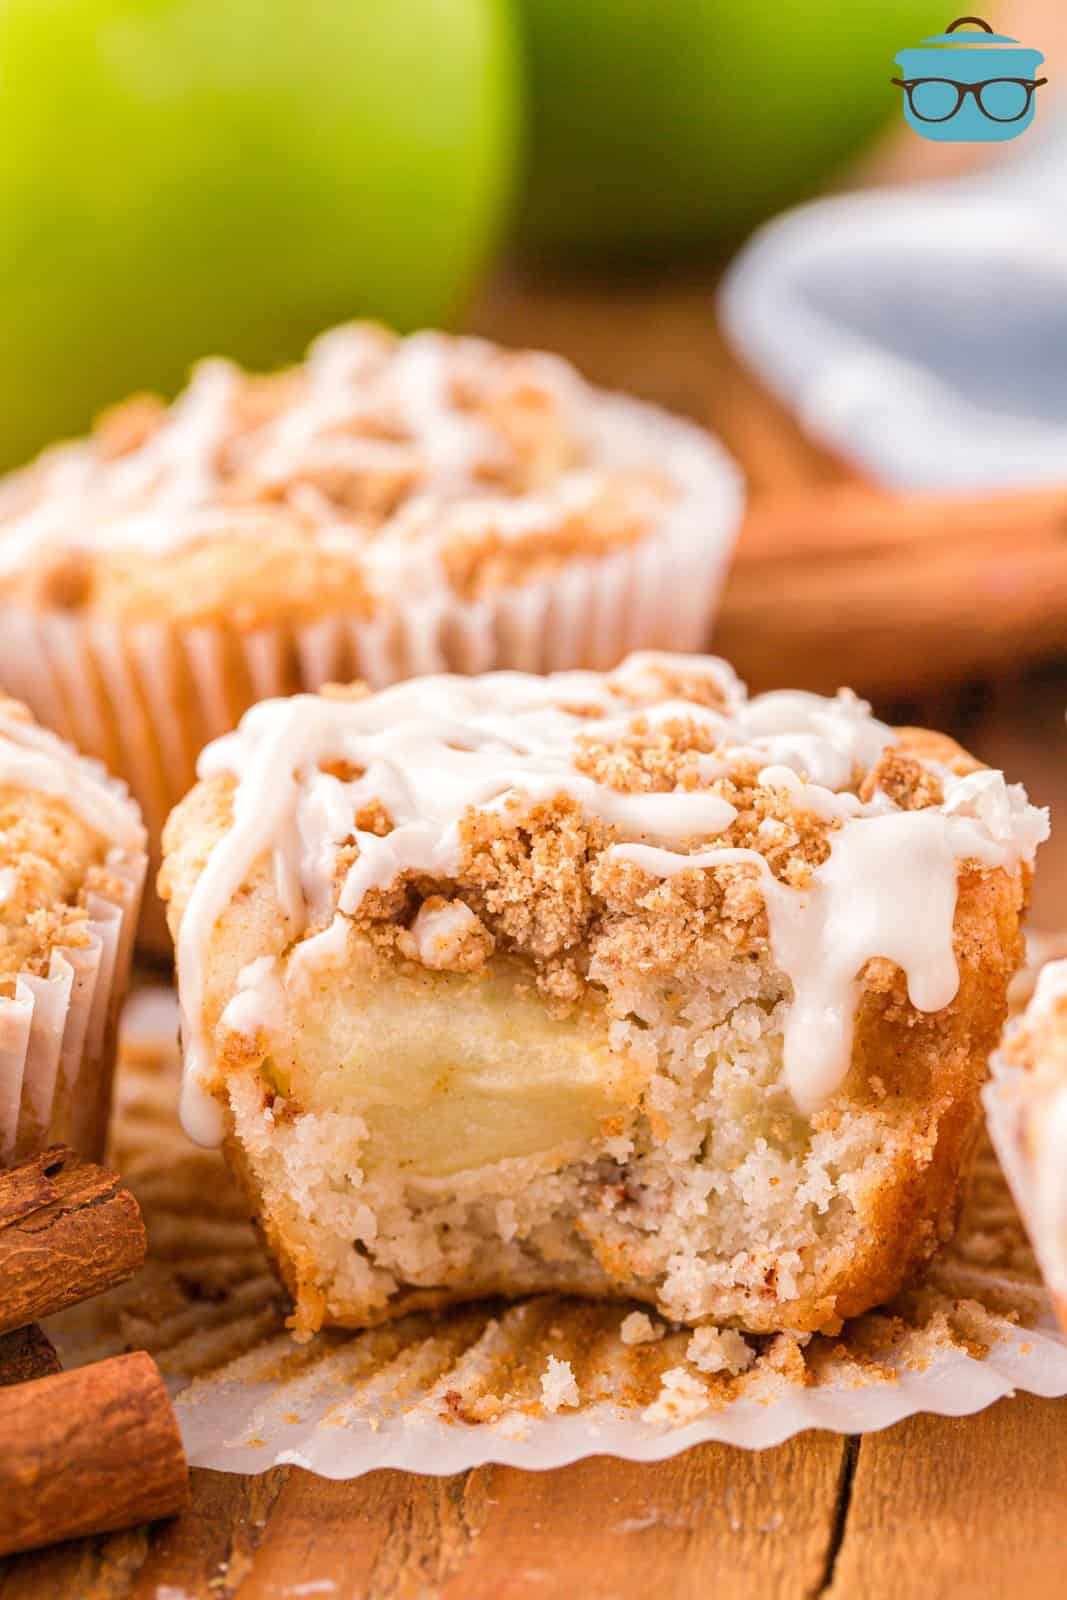 An Apple Streusel Muffin with a bite taken out.